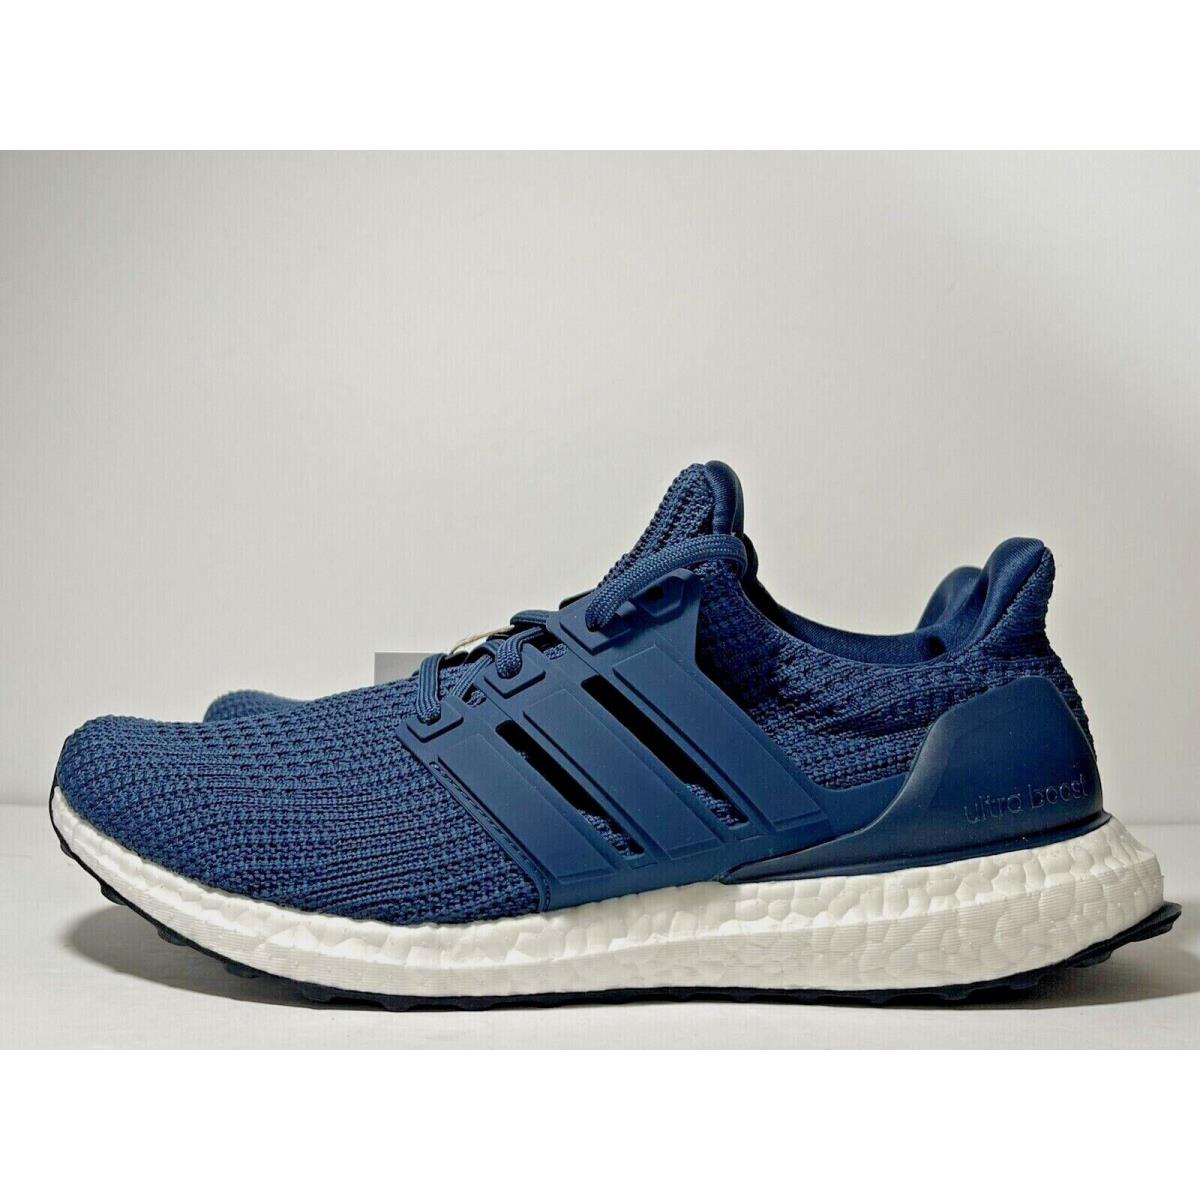 Adidas shoes UltraBoost DNA - Blue 0